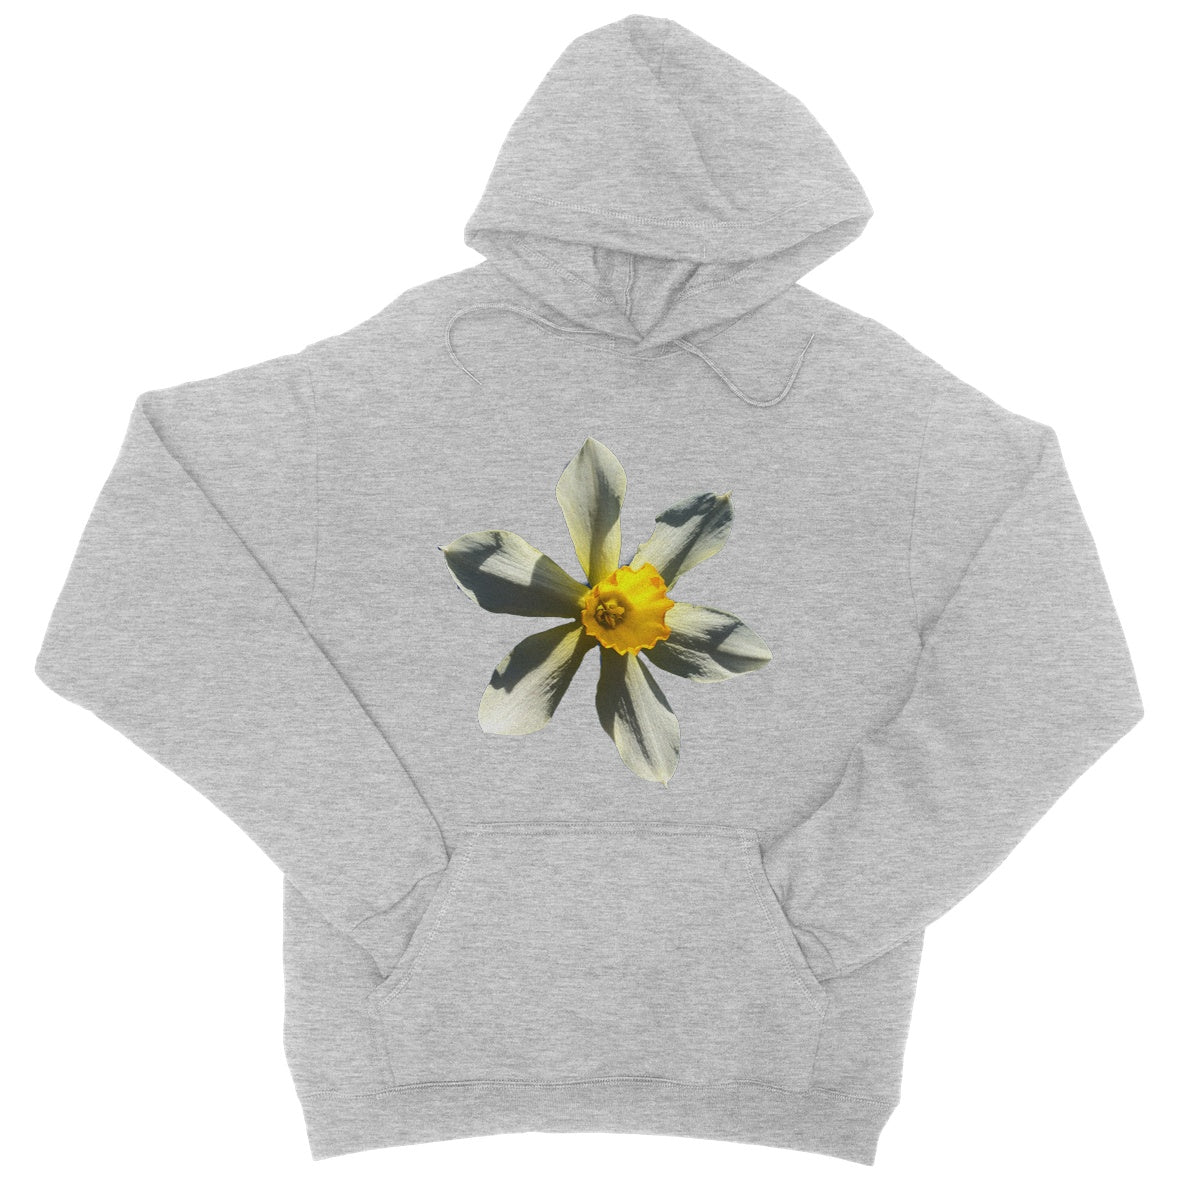 Daffodil College Hoodie - Nature of Flowers